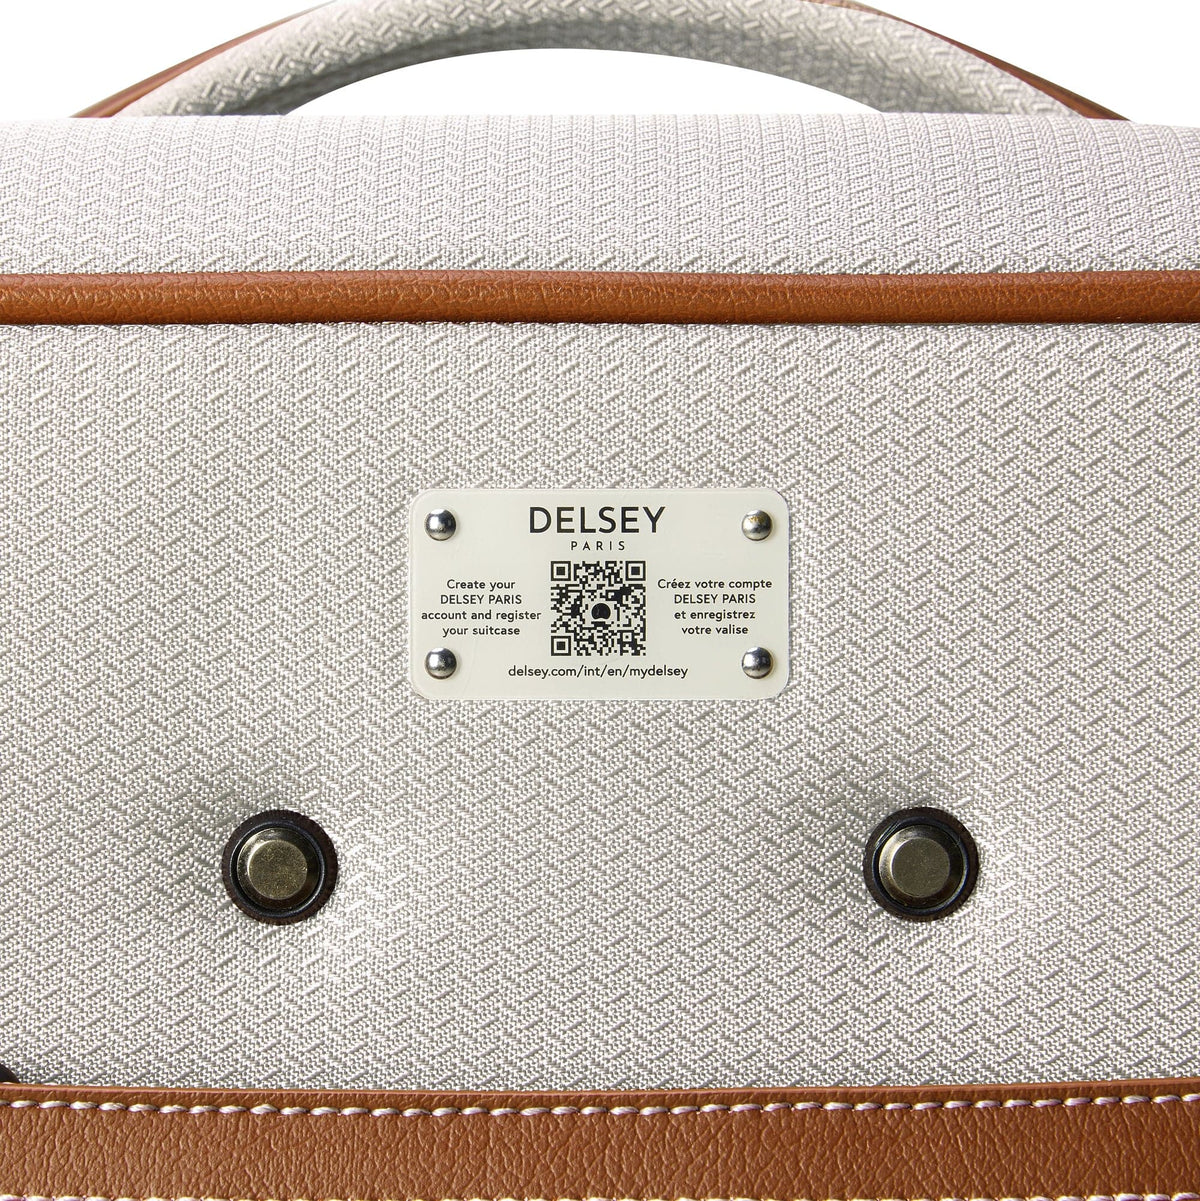 Delsey Chatelet Air 2.0 Underseater Wheeled Carry-On Luggage